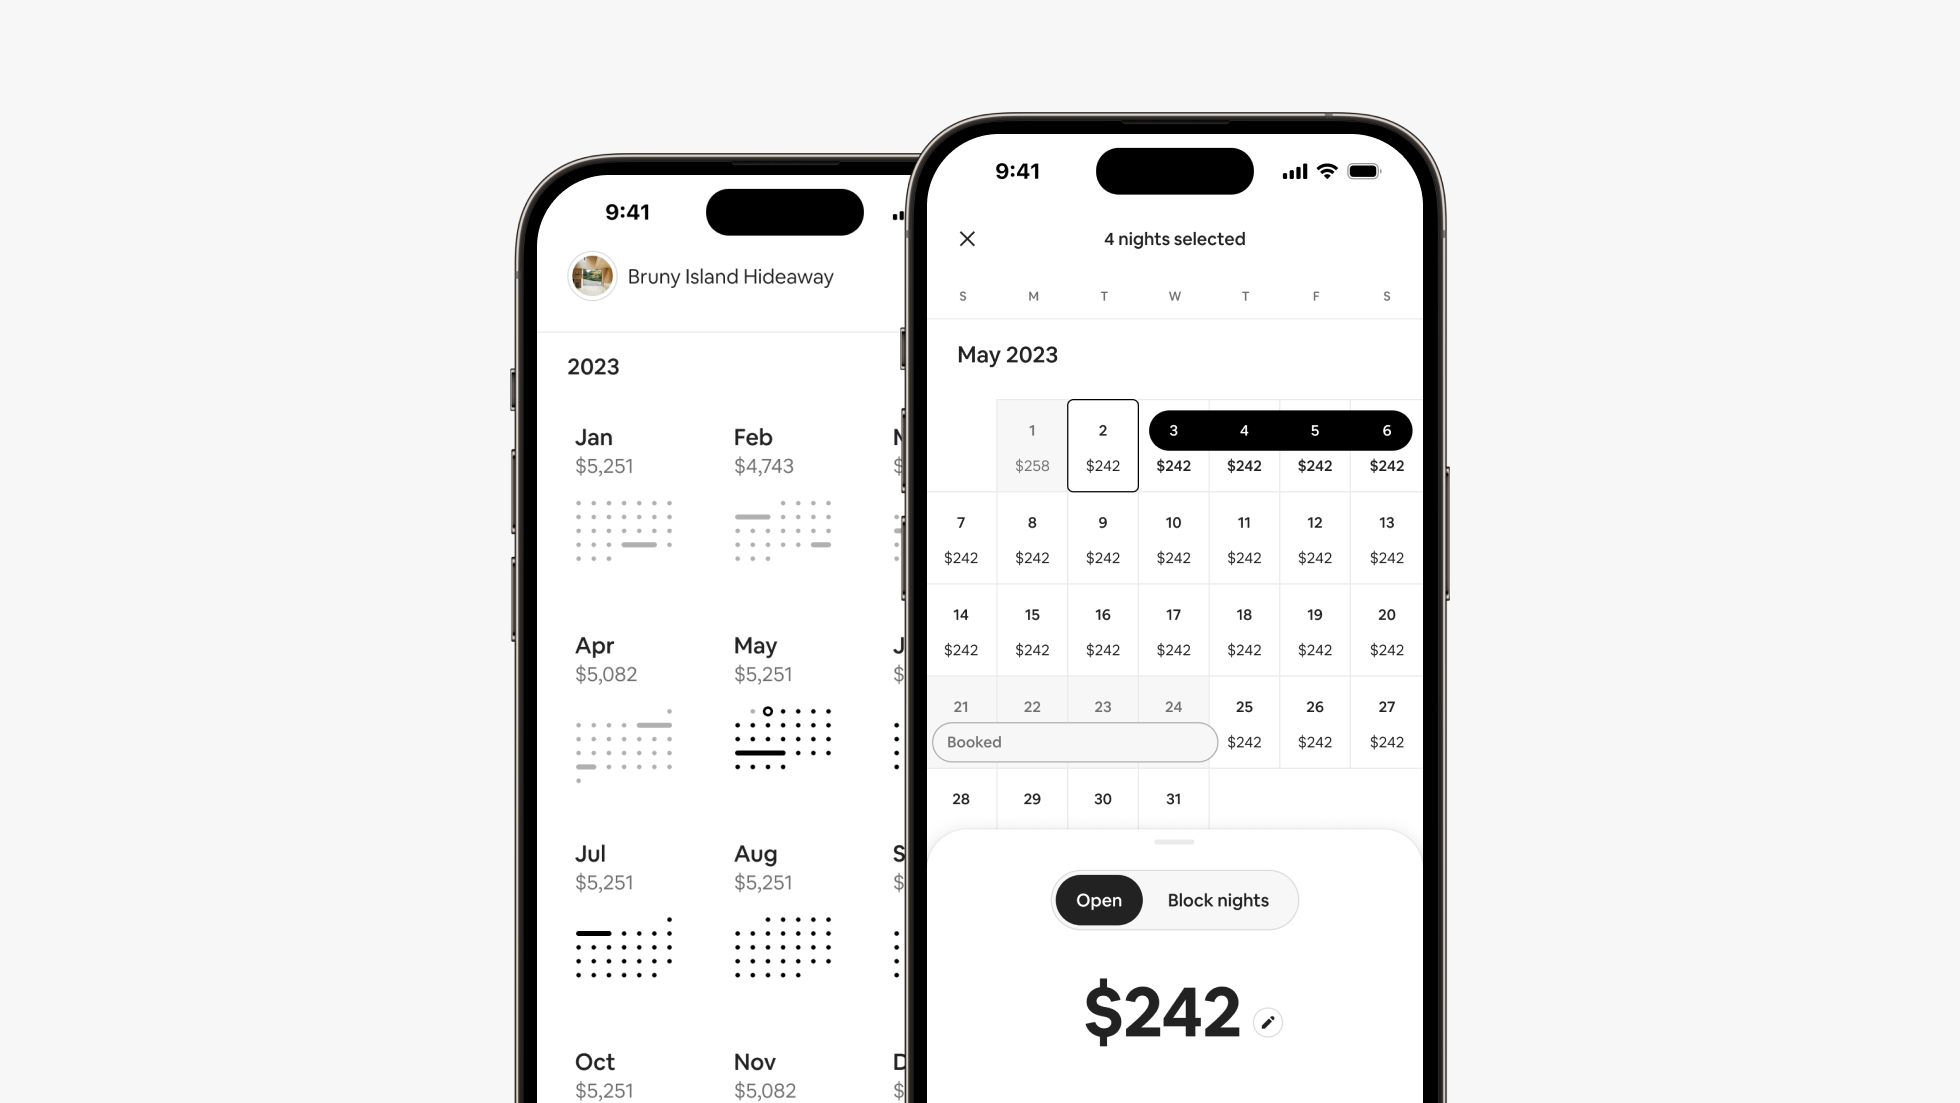 Phone screens show the yearly view with monthly prices and the monthly view with the nightly price for four nights selected.